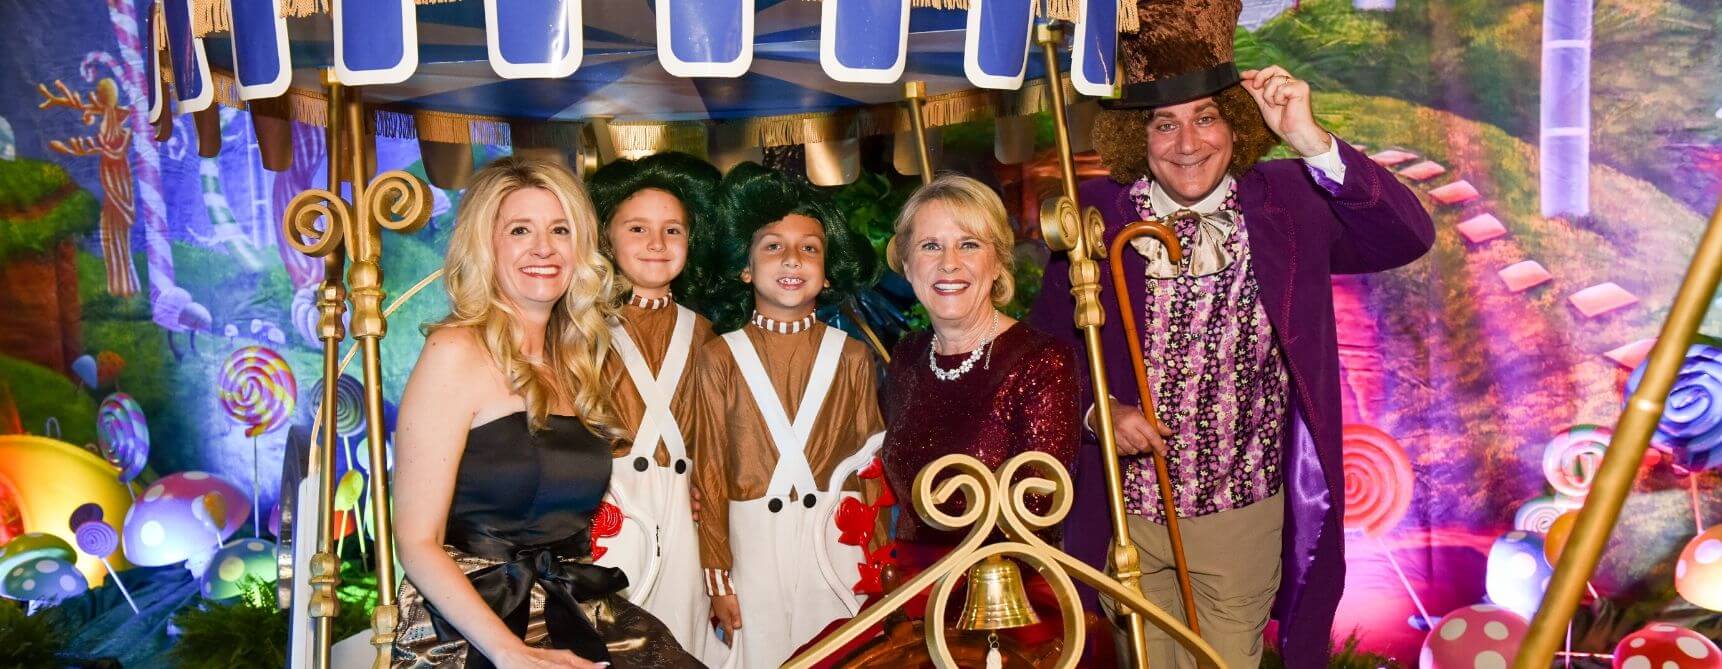 All Children's Hospital Willy Wonka Themed Event